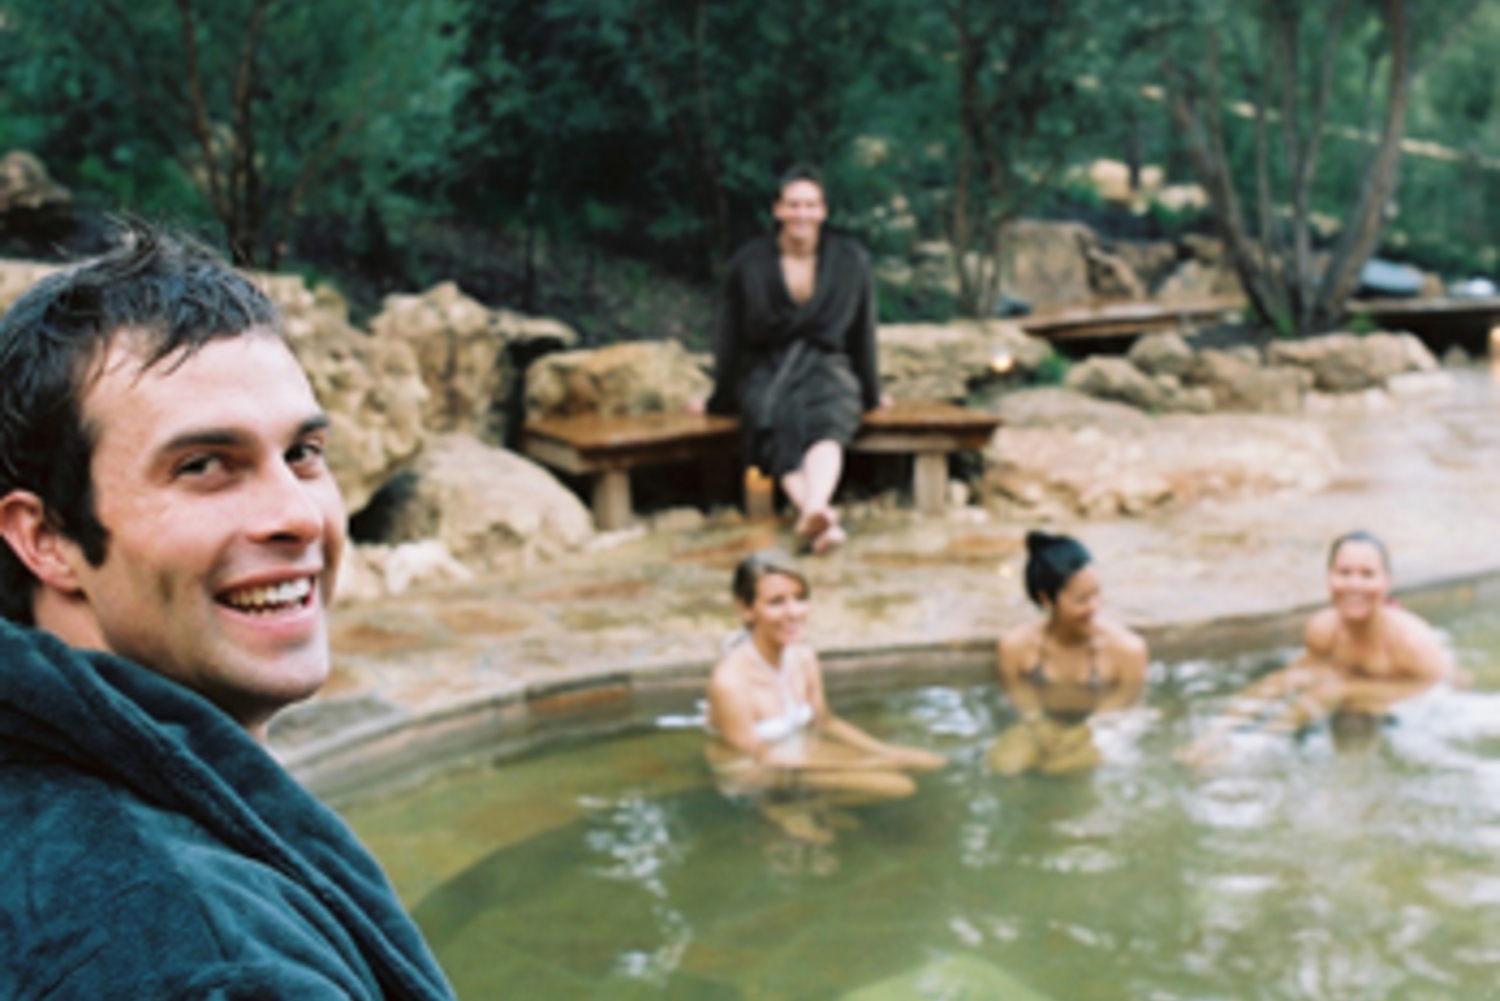 Peninsula Hot Springs Tour from Melbourne